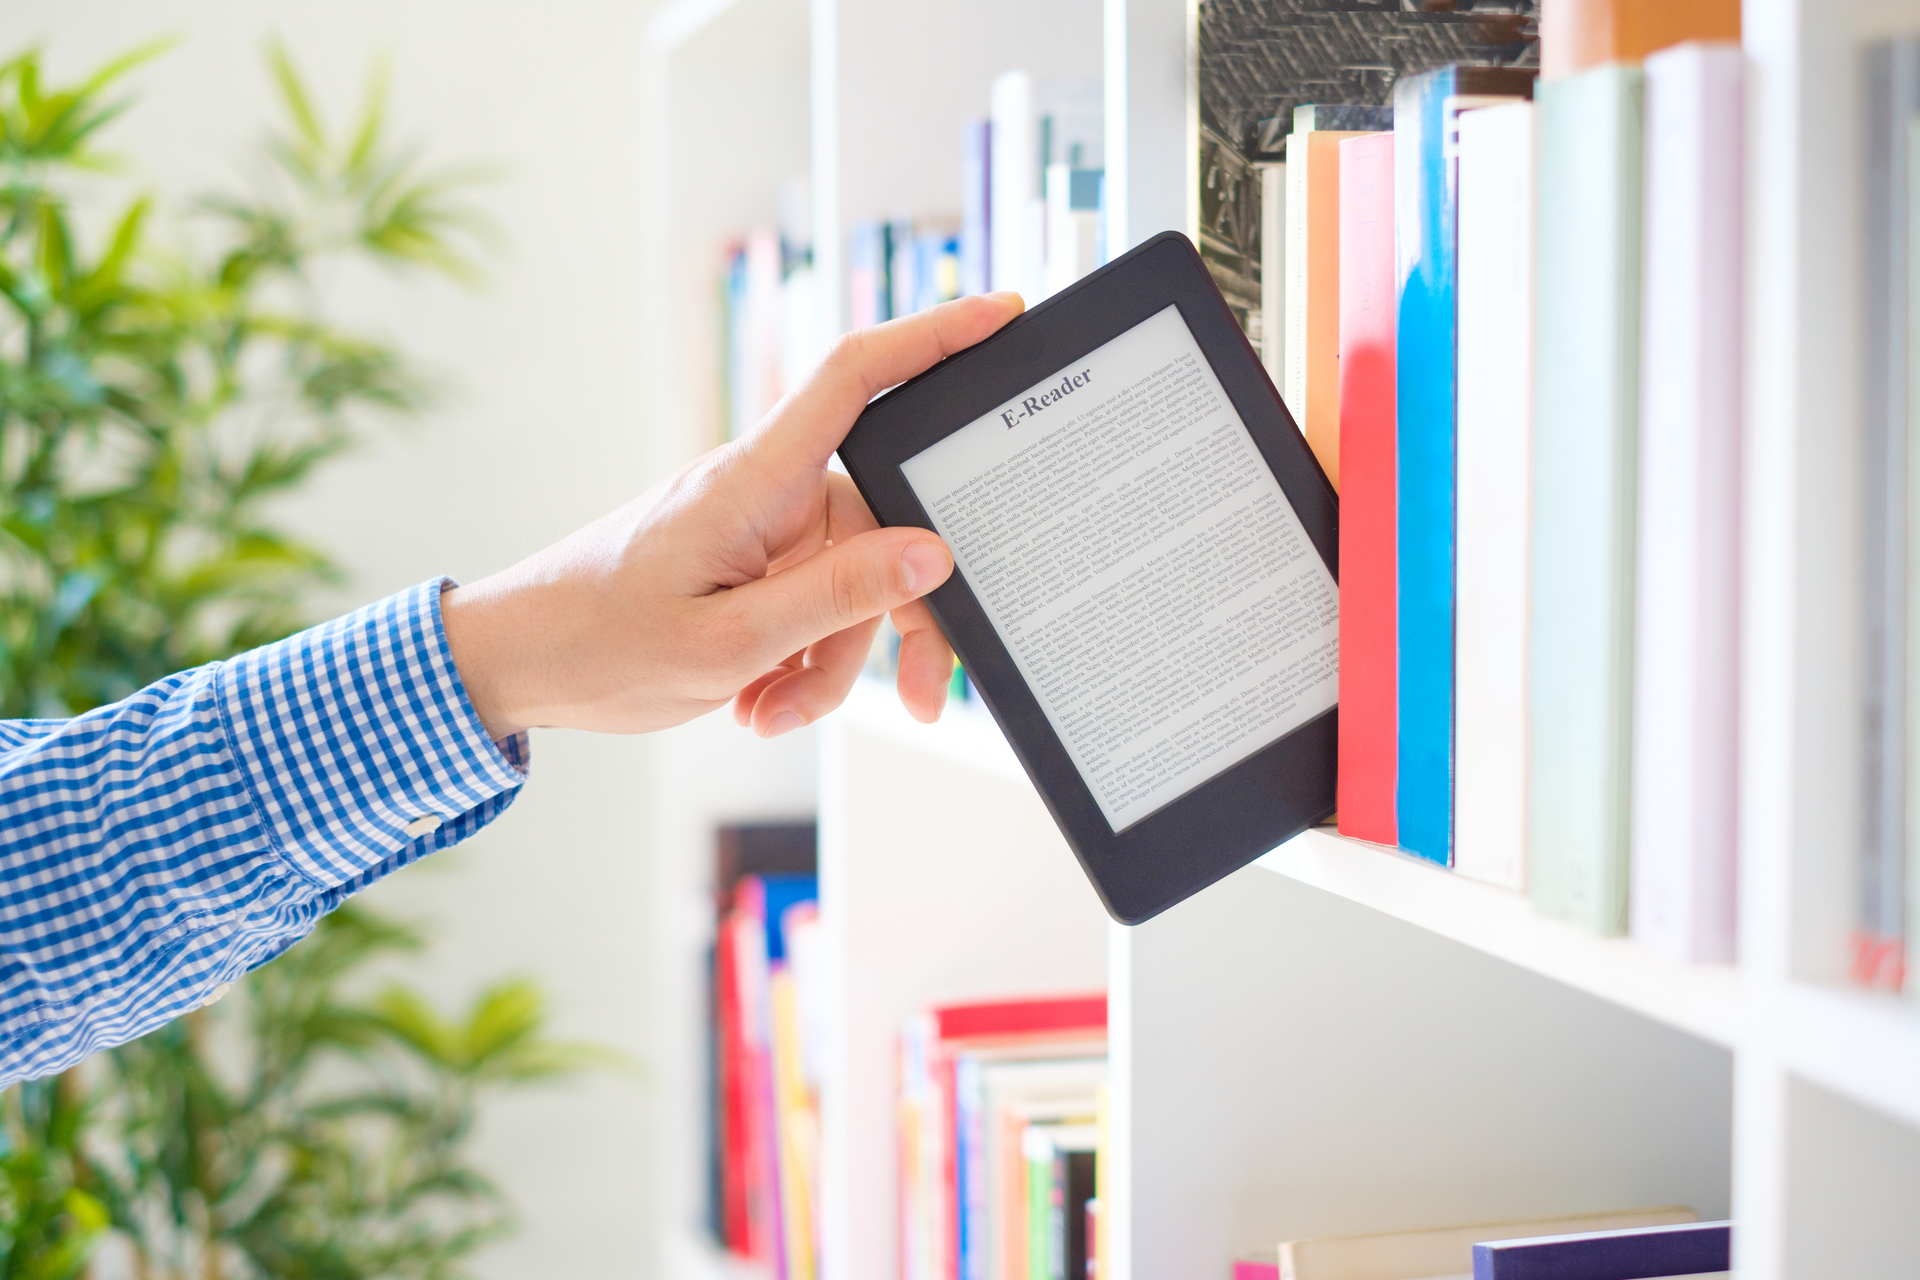 What are the C02 effects between e-readers and paper books?